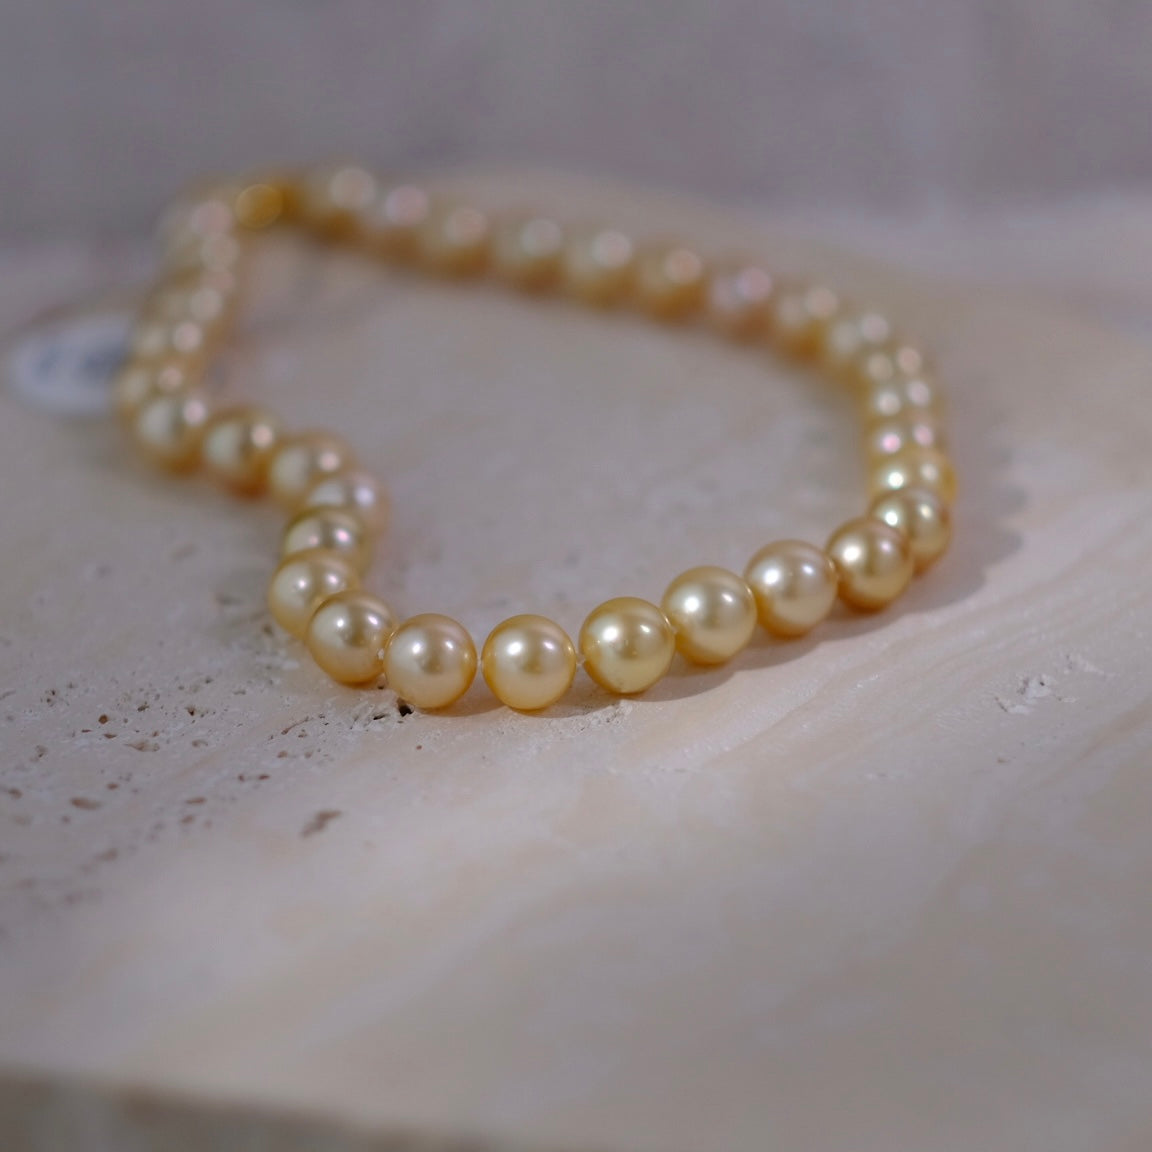 Golden South Sea Pearl Necklace, 11.1-12.7mm, GUILD Certificate